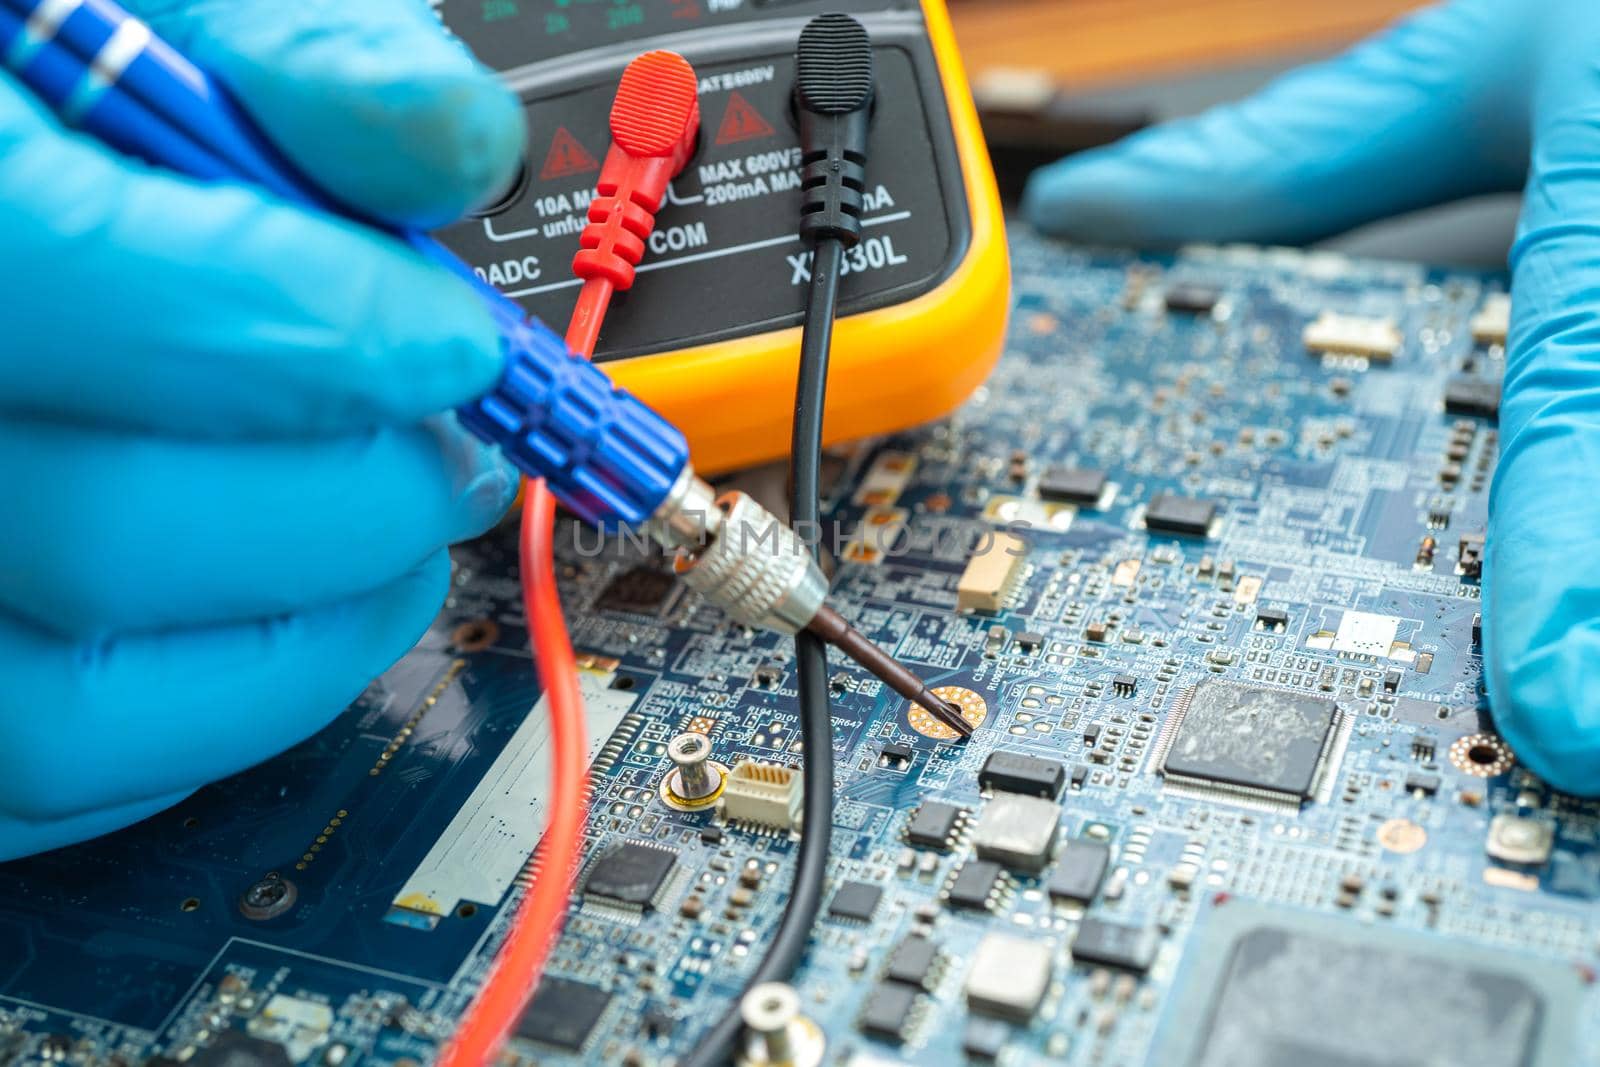 technician repairing inside of hard disk by soldering iron. Integrated Circuit. the concept of data, hardware, technician and technology.